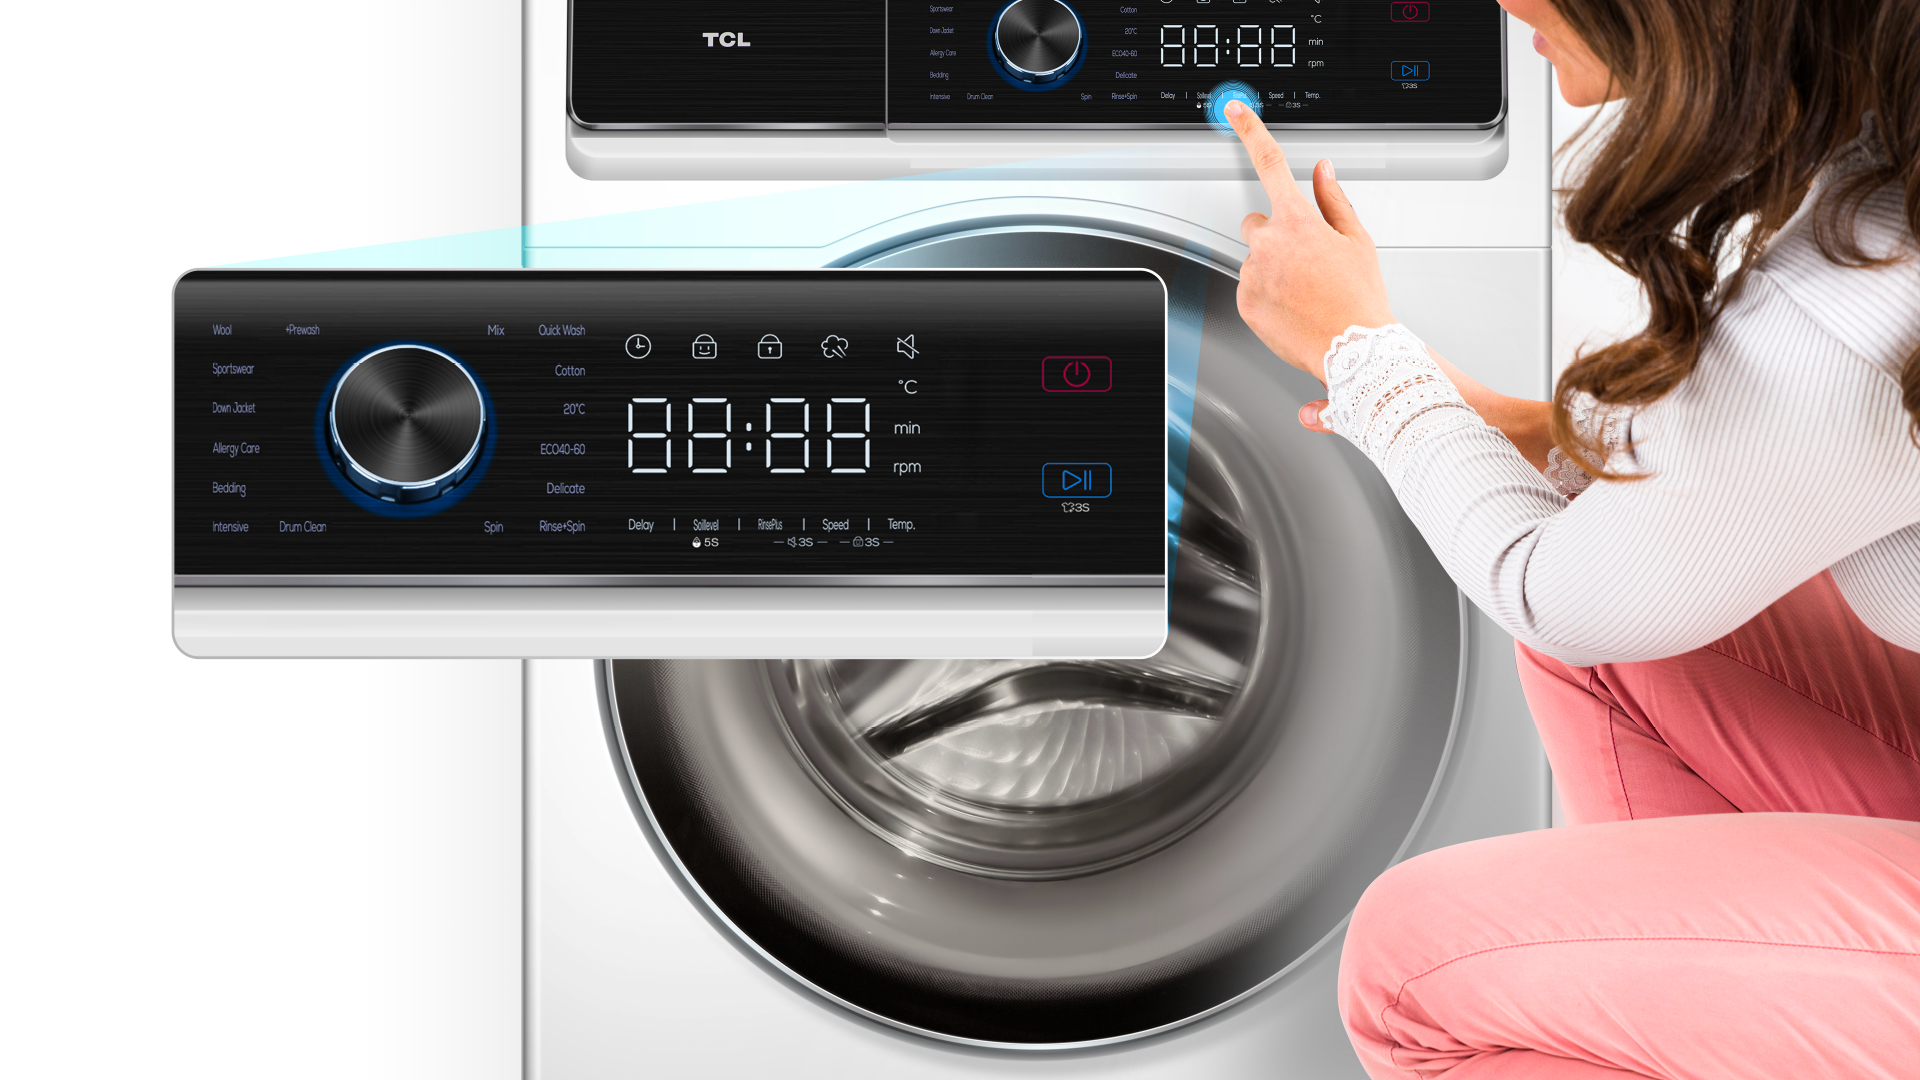 TCL Washing Machine fp1024wc0 Touch Control Display